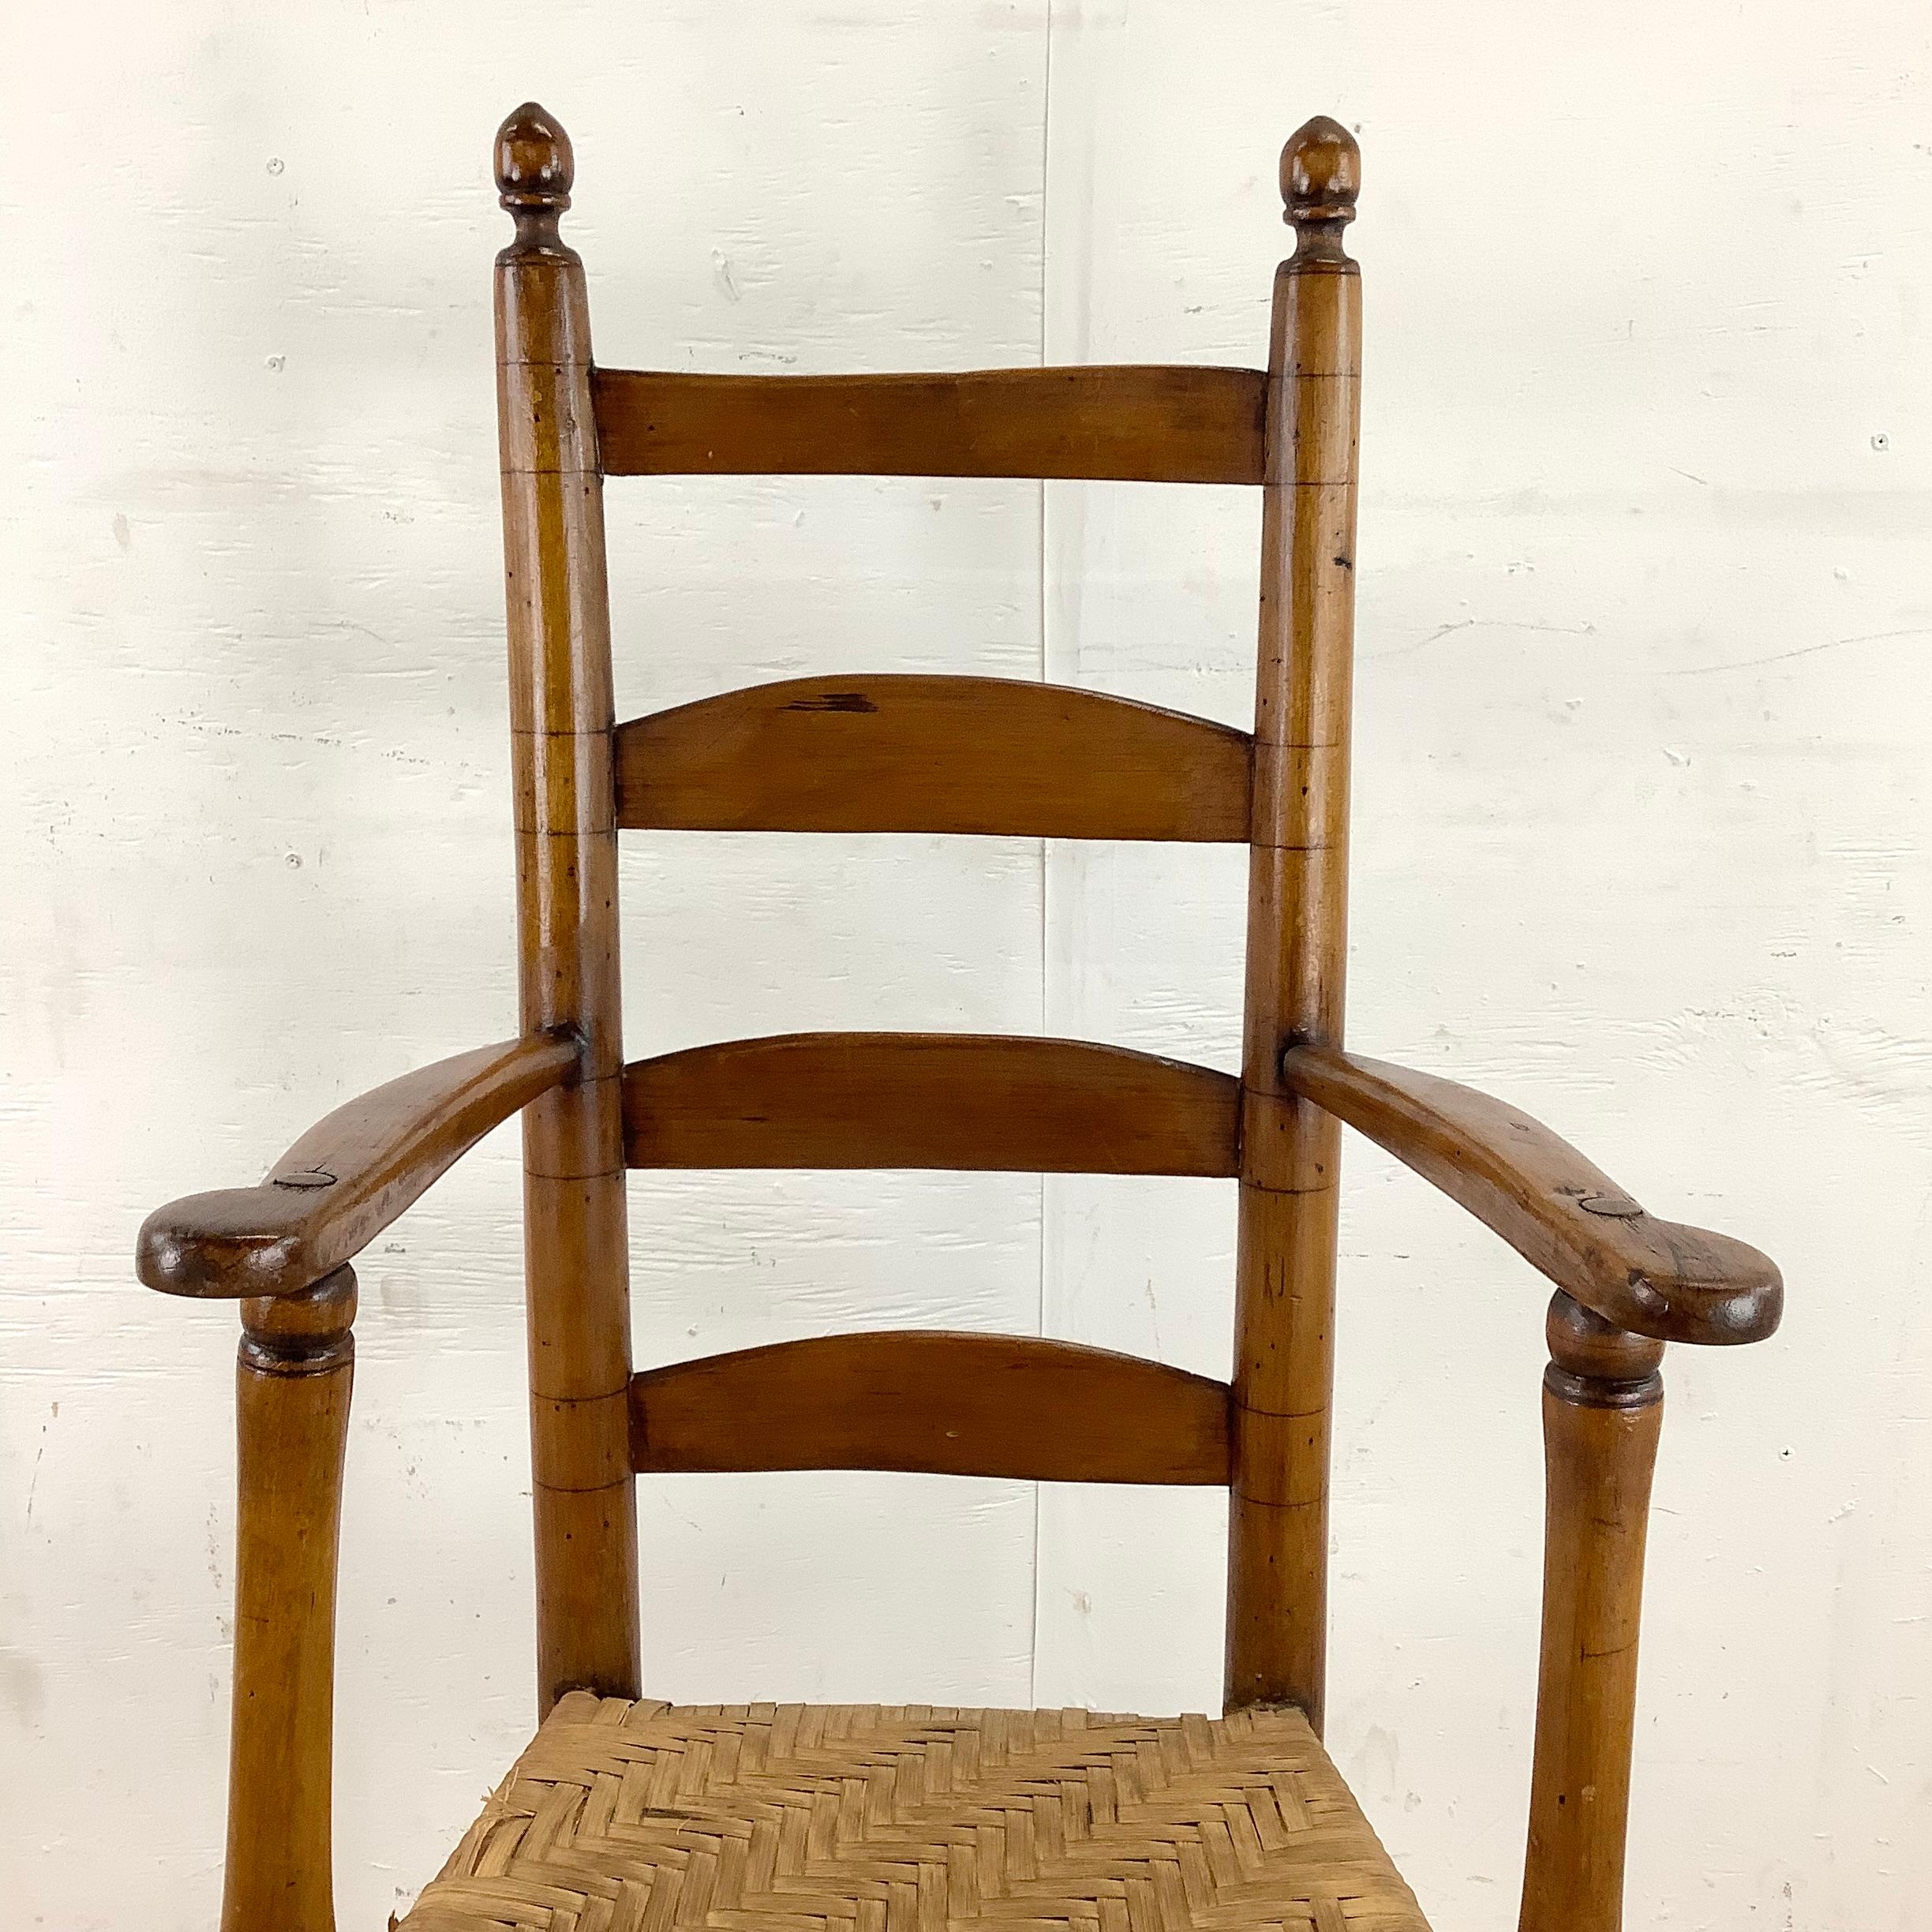 Other Vintage Antique Rush Seat Child Rocking Chair For Sale